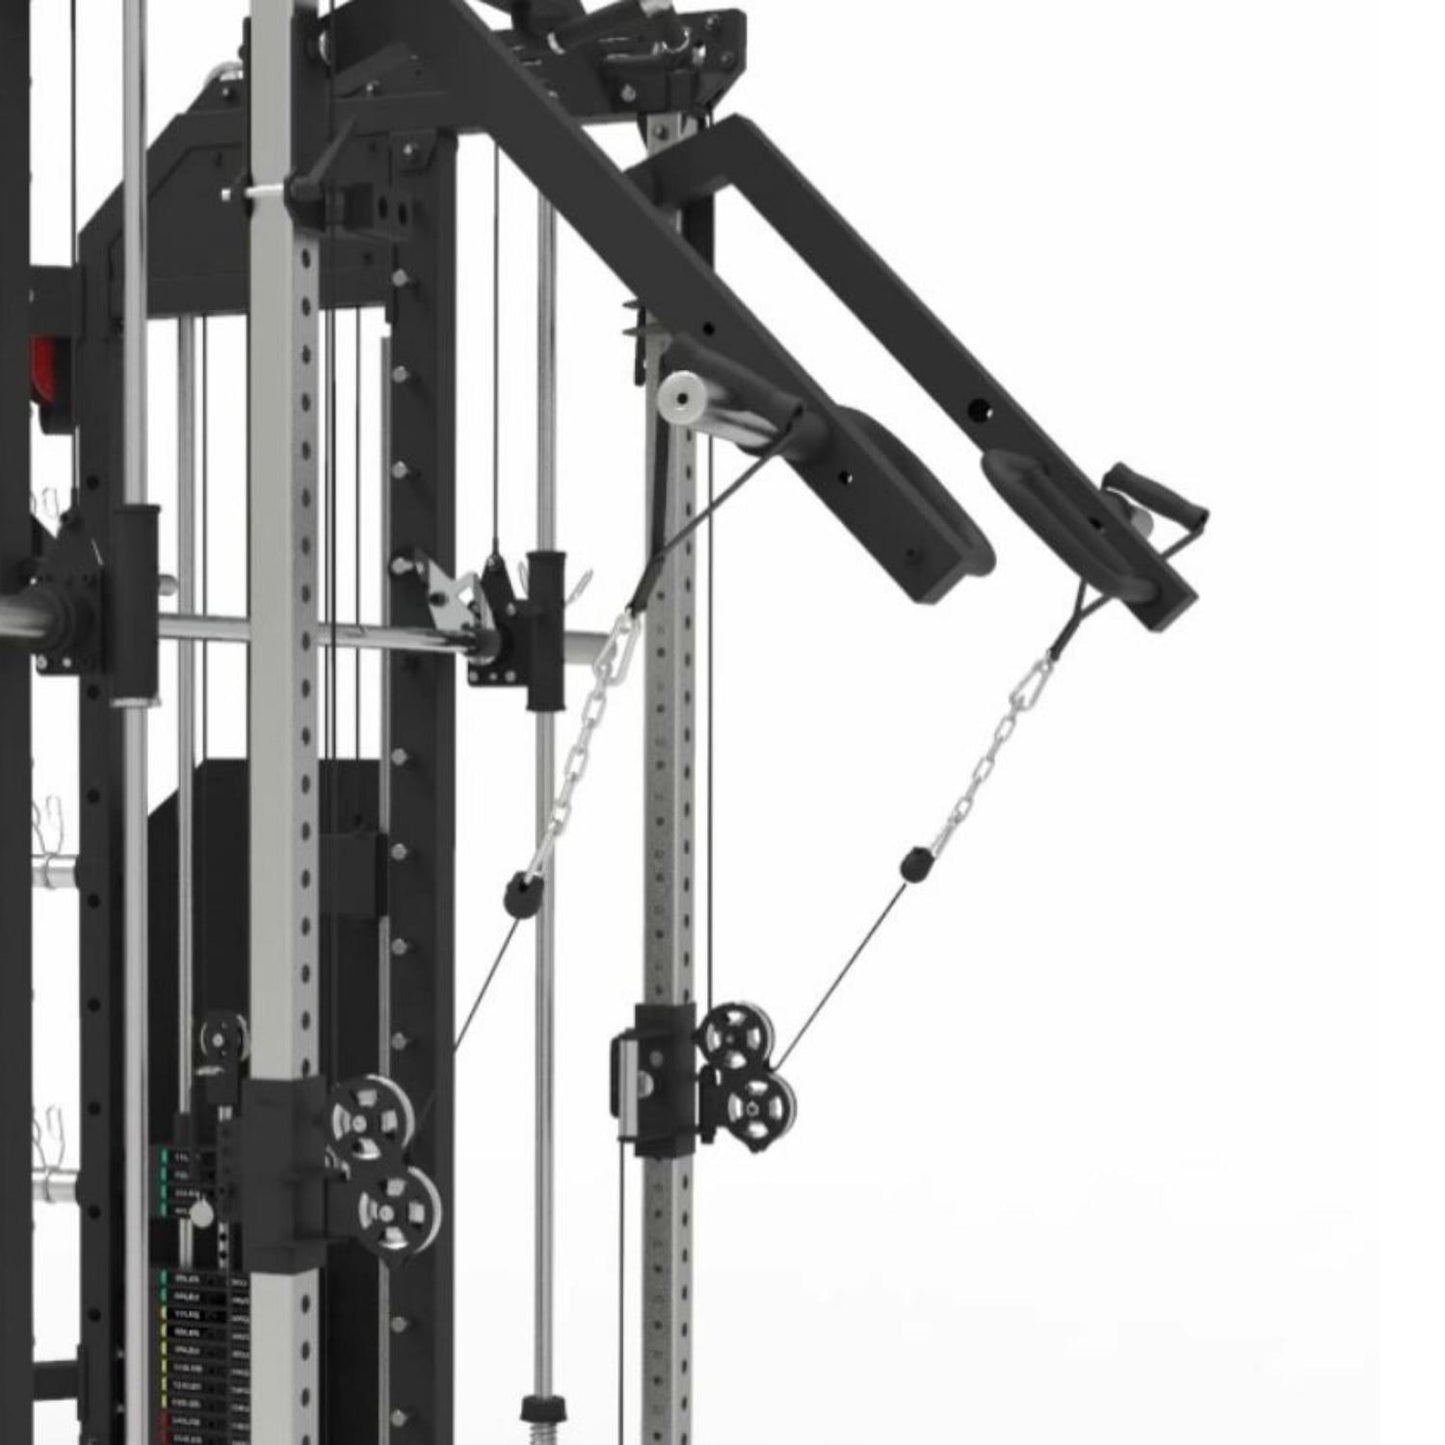 -Commercial Multi-Functional Trainers-Gym Direct